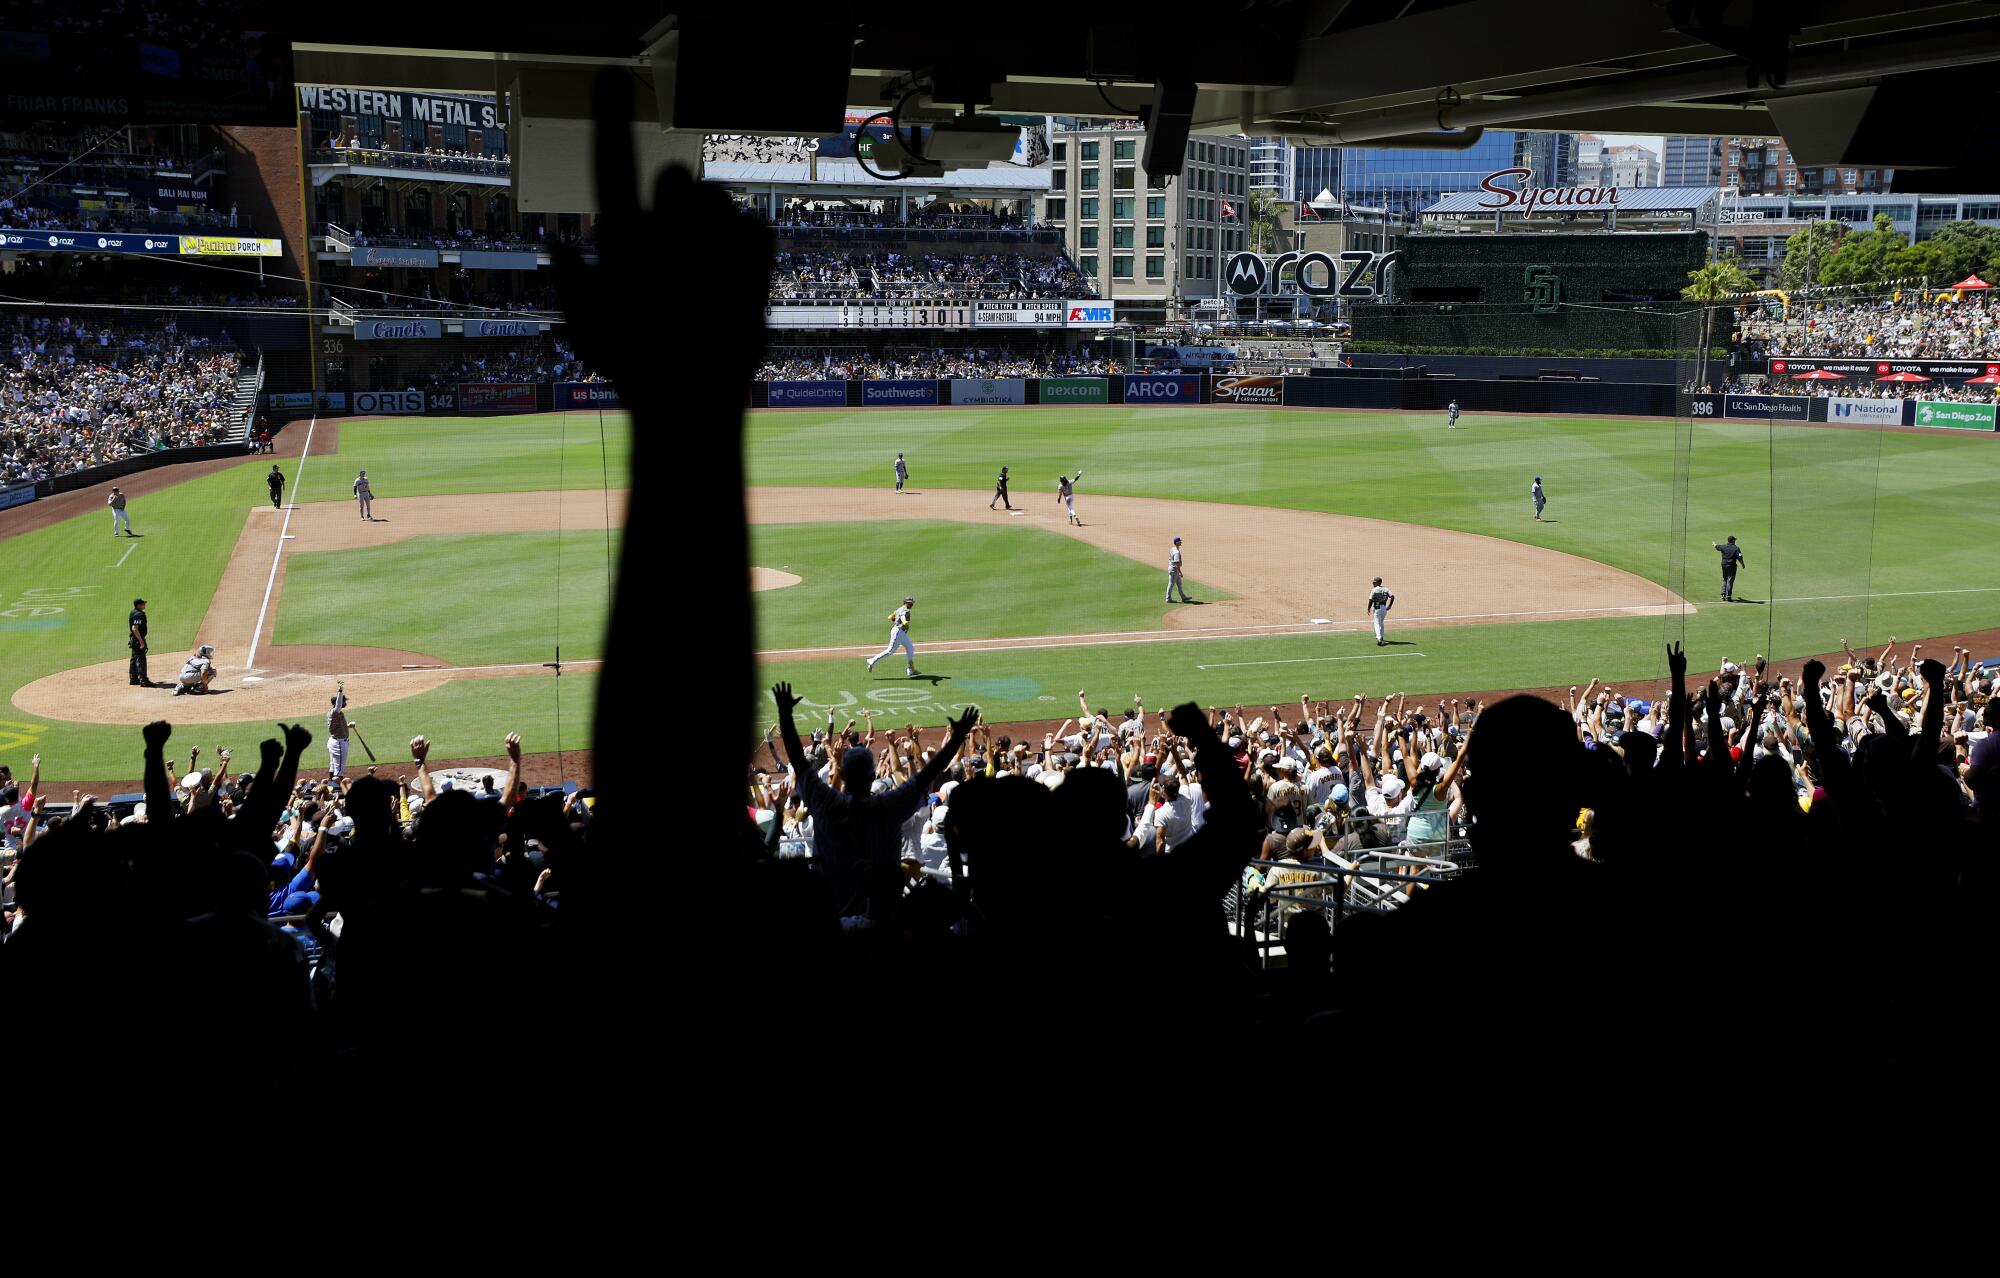 Machado hits a home run and a 2-run, go-ahead single to lift the Padres  over the Dodgers 8-3 - The San Diego Union-Tribune